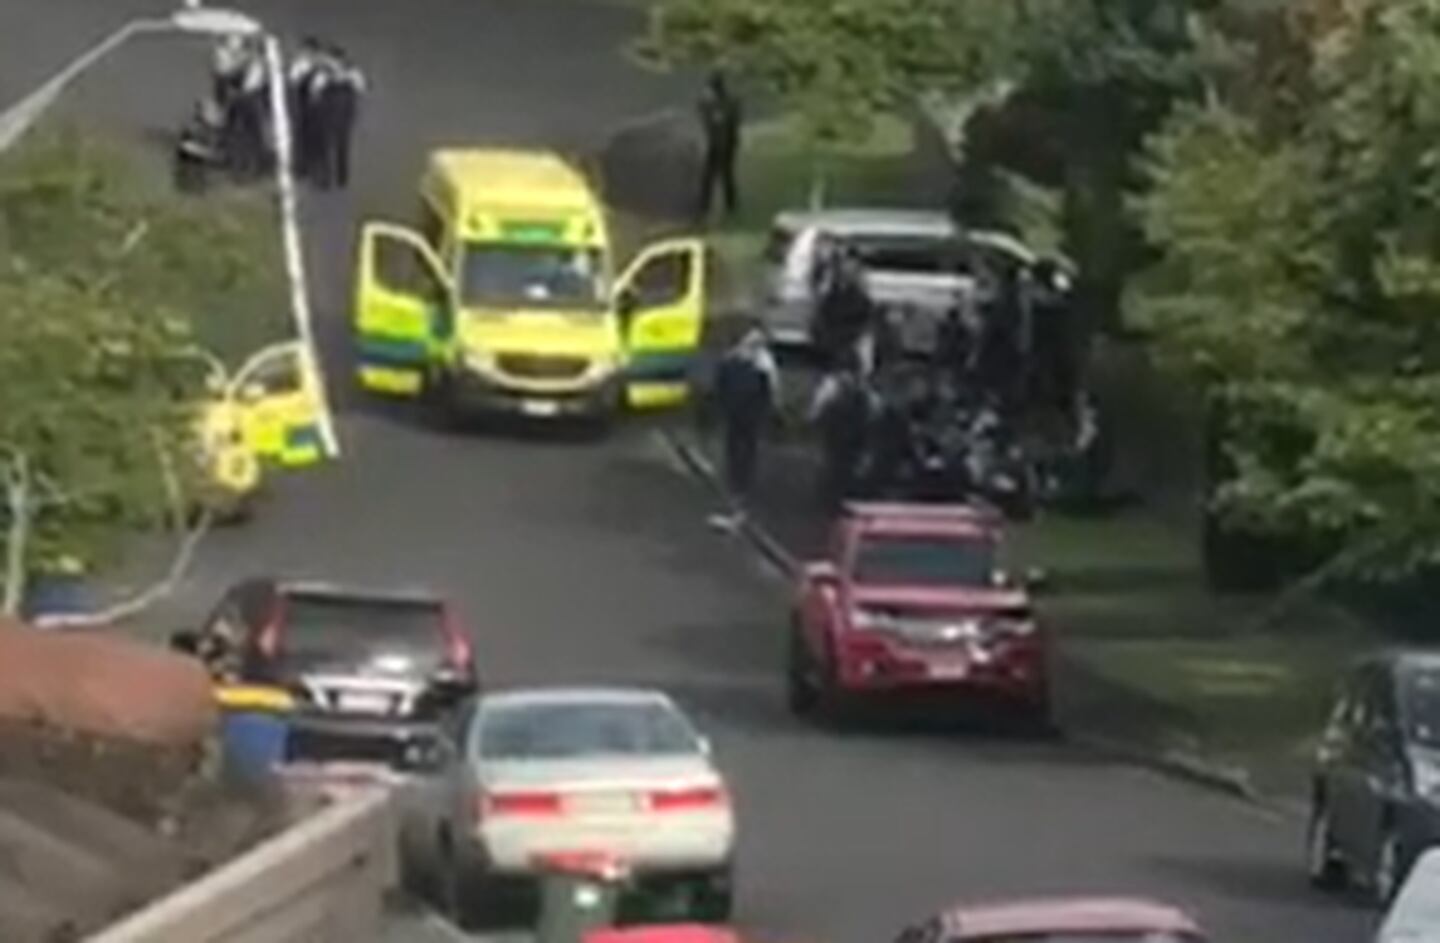 Footage filmed by a neighbour shows a person, believed to be a police officer, being treated by ambulance staff.